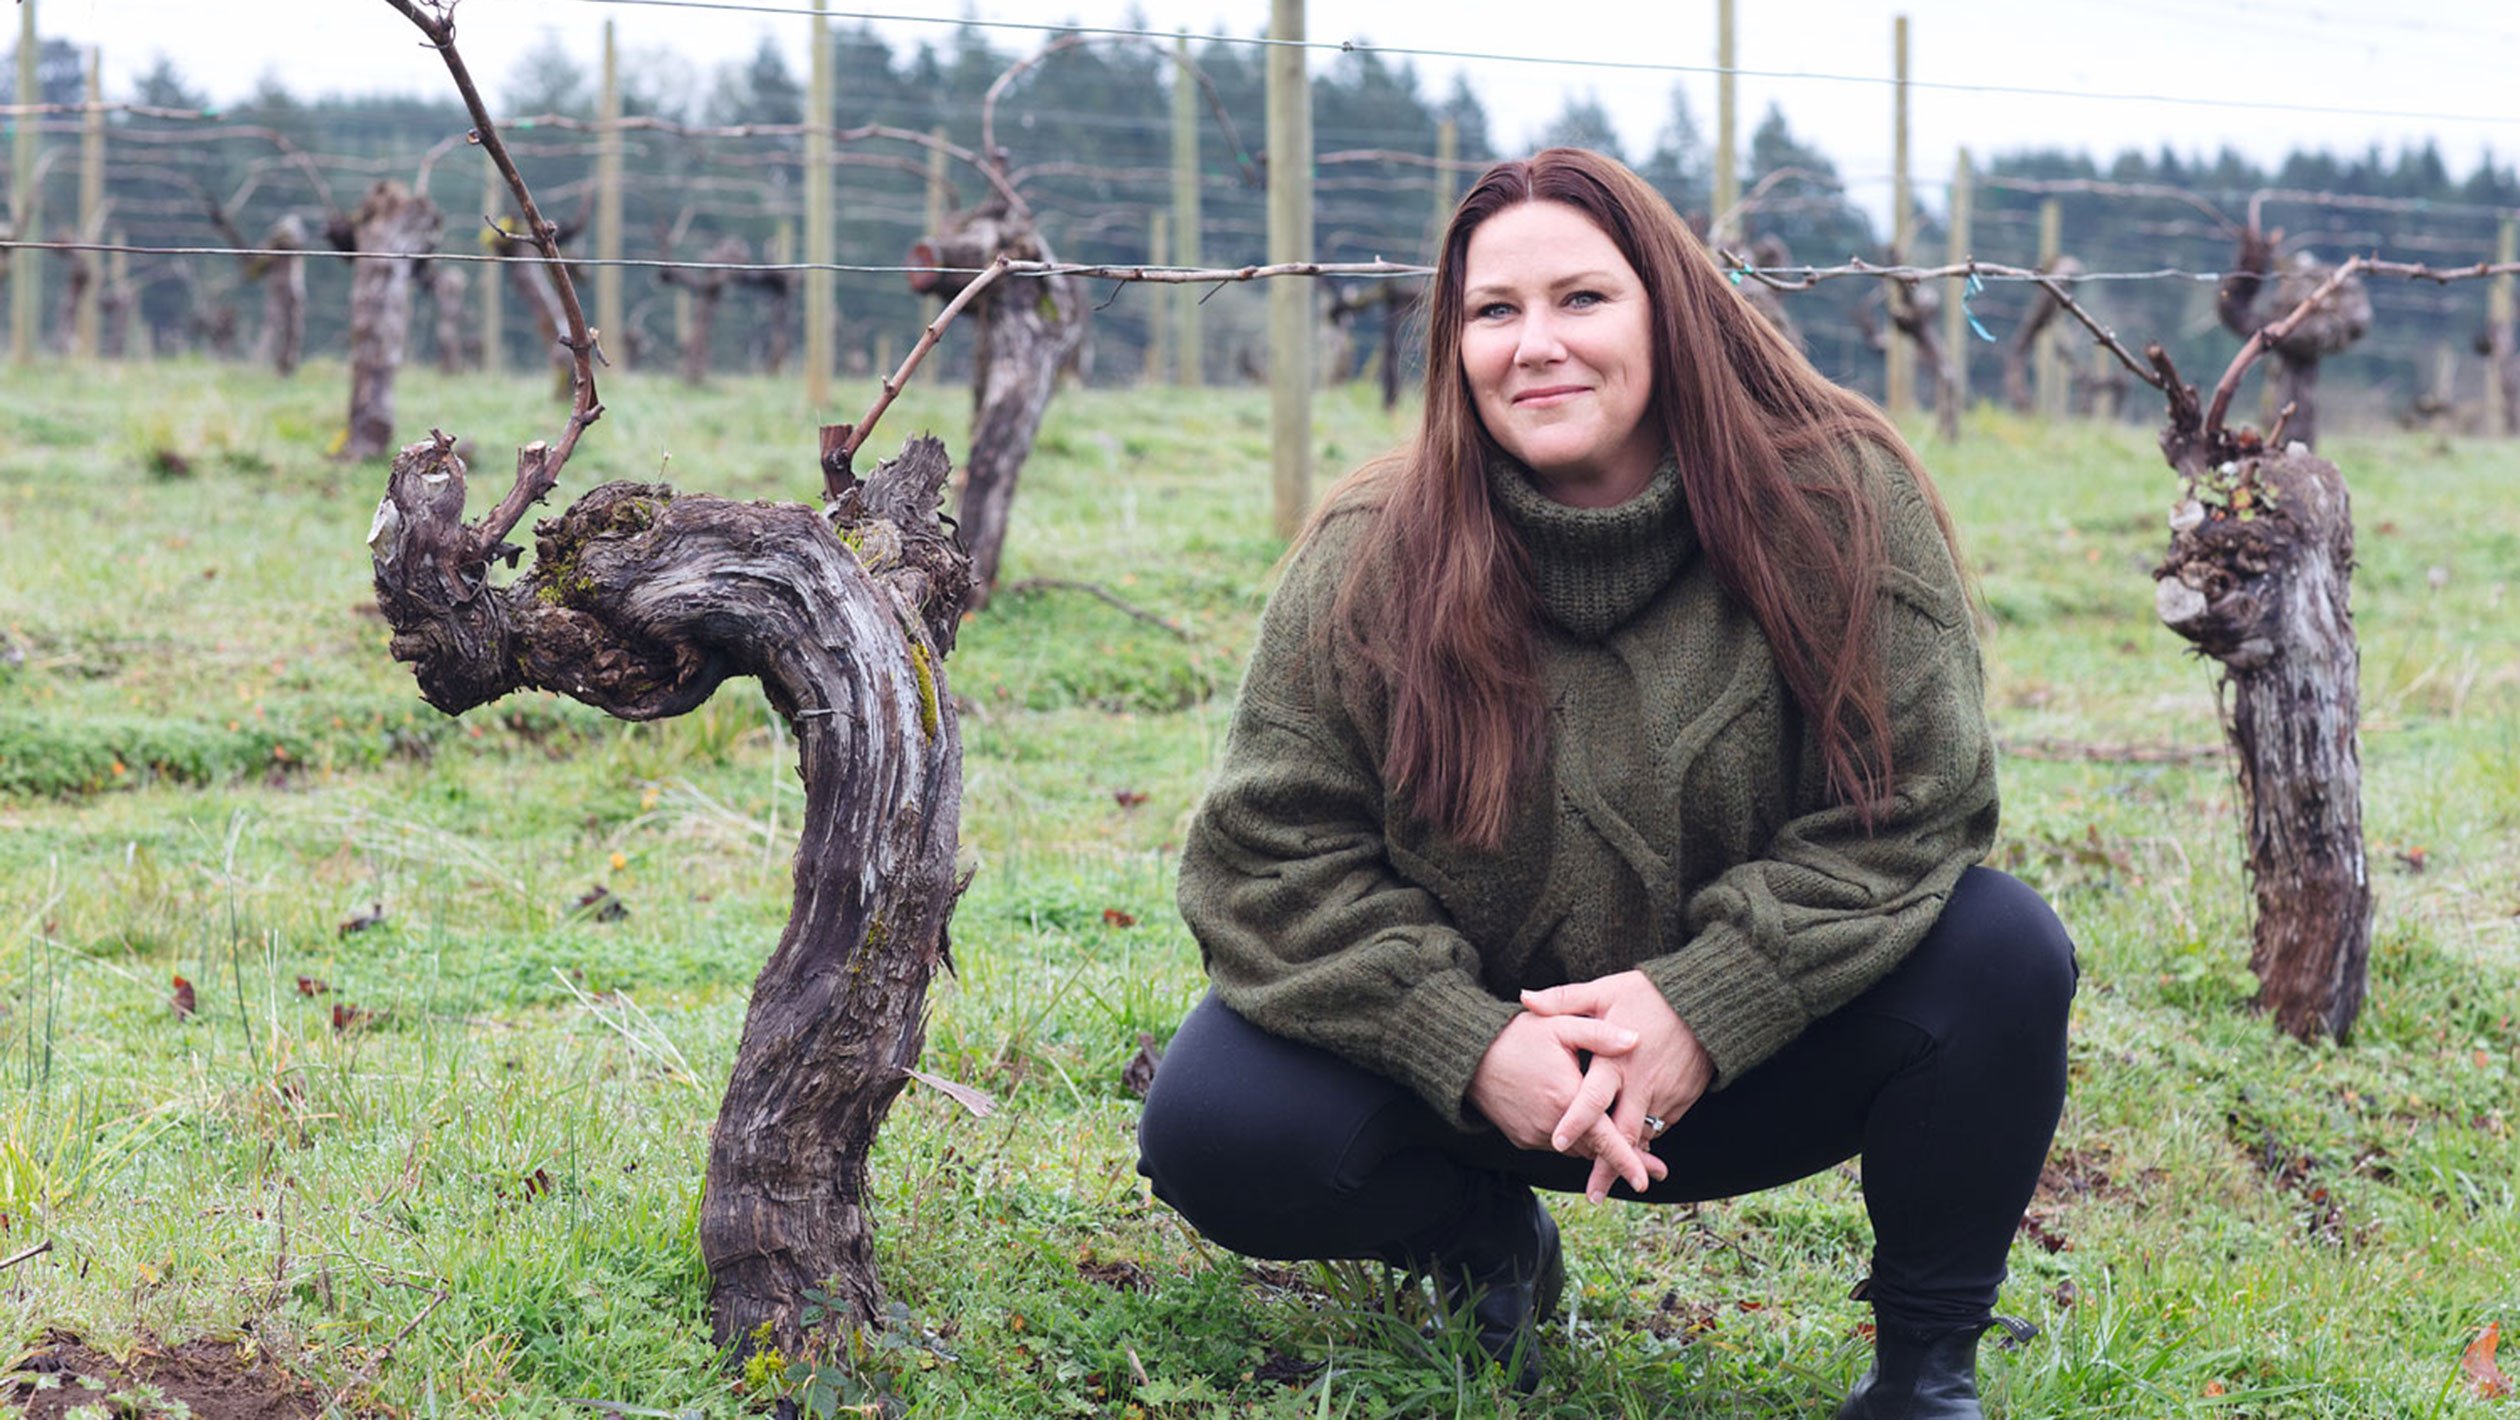 Winemaker Bree Stock of Limited Addition poses next to a vine